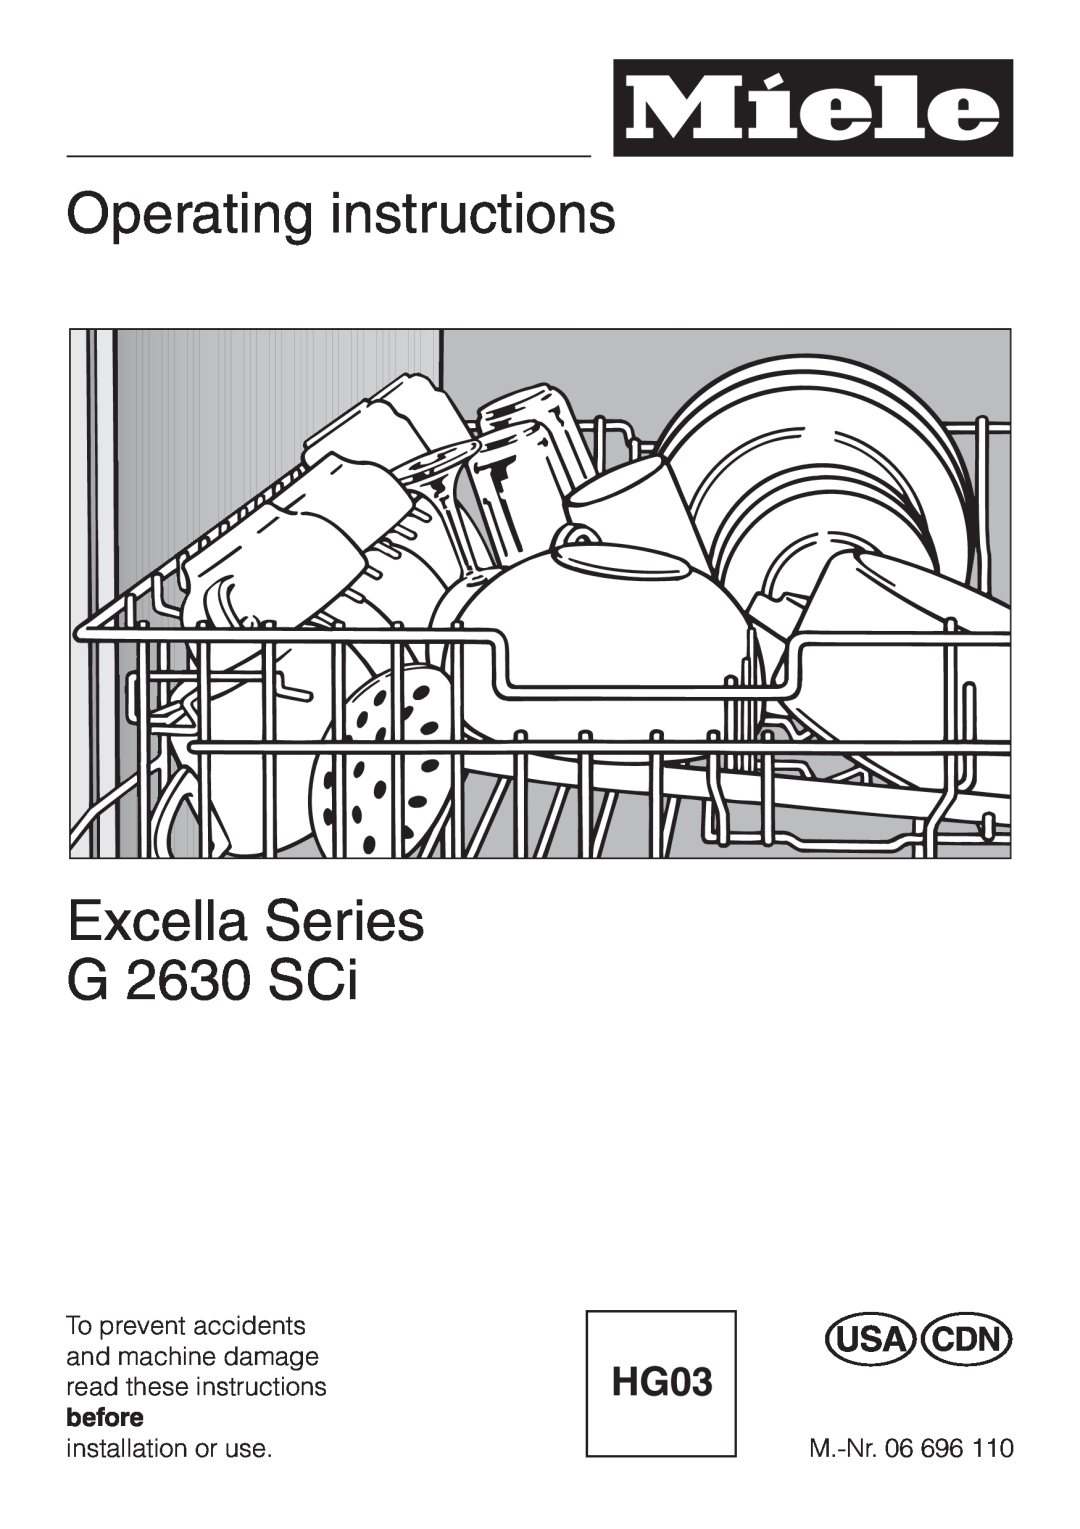 Miele G 2630 SCI operating instructions Operating instructions Excella Series G 2630 SCi 